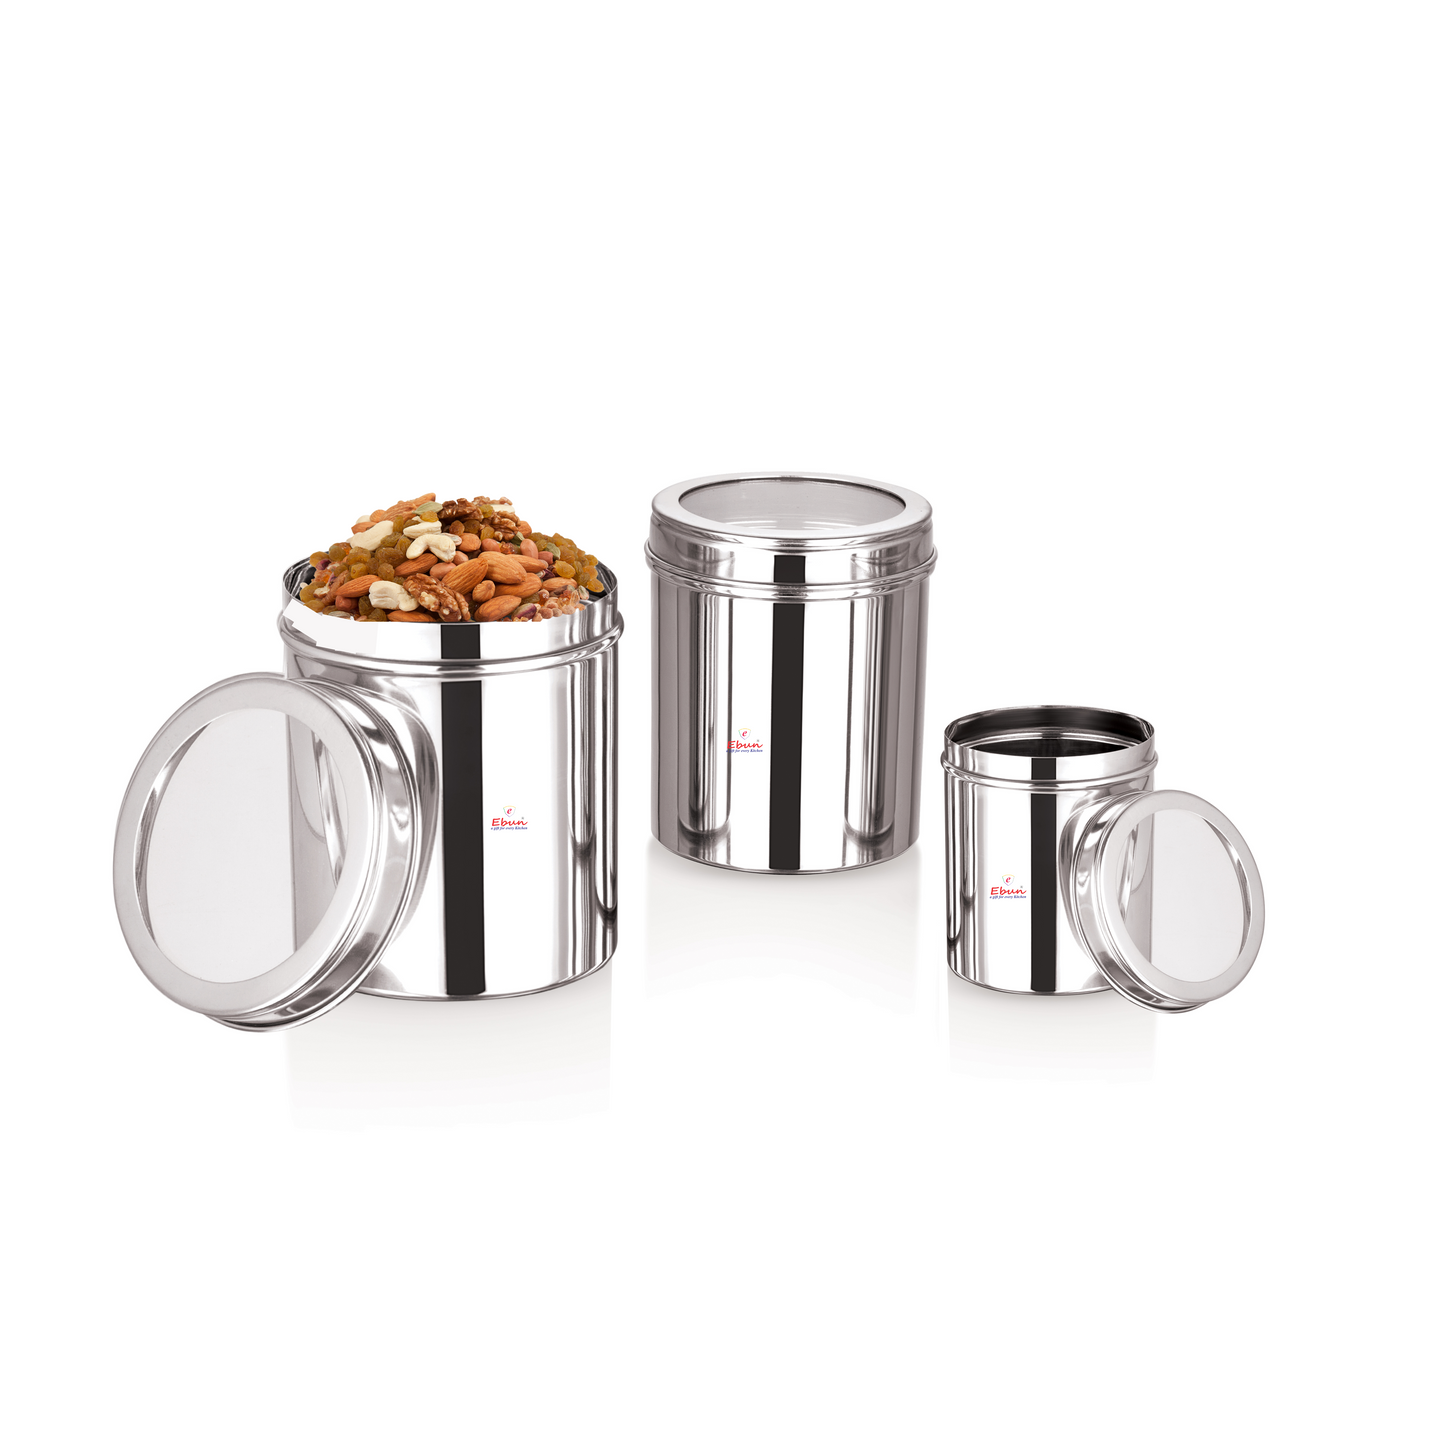 Ebun Stainless Steel Top See Through Containers 200 Gms to 500 Gms Combo Set